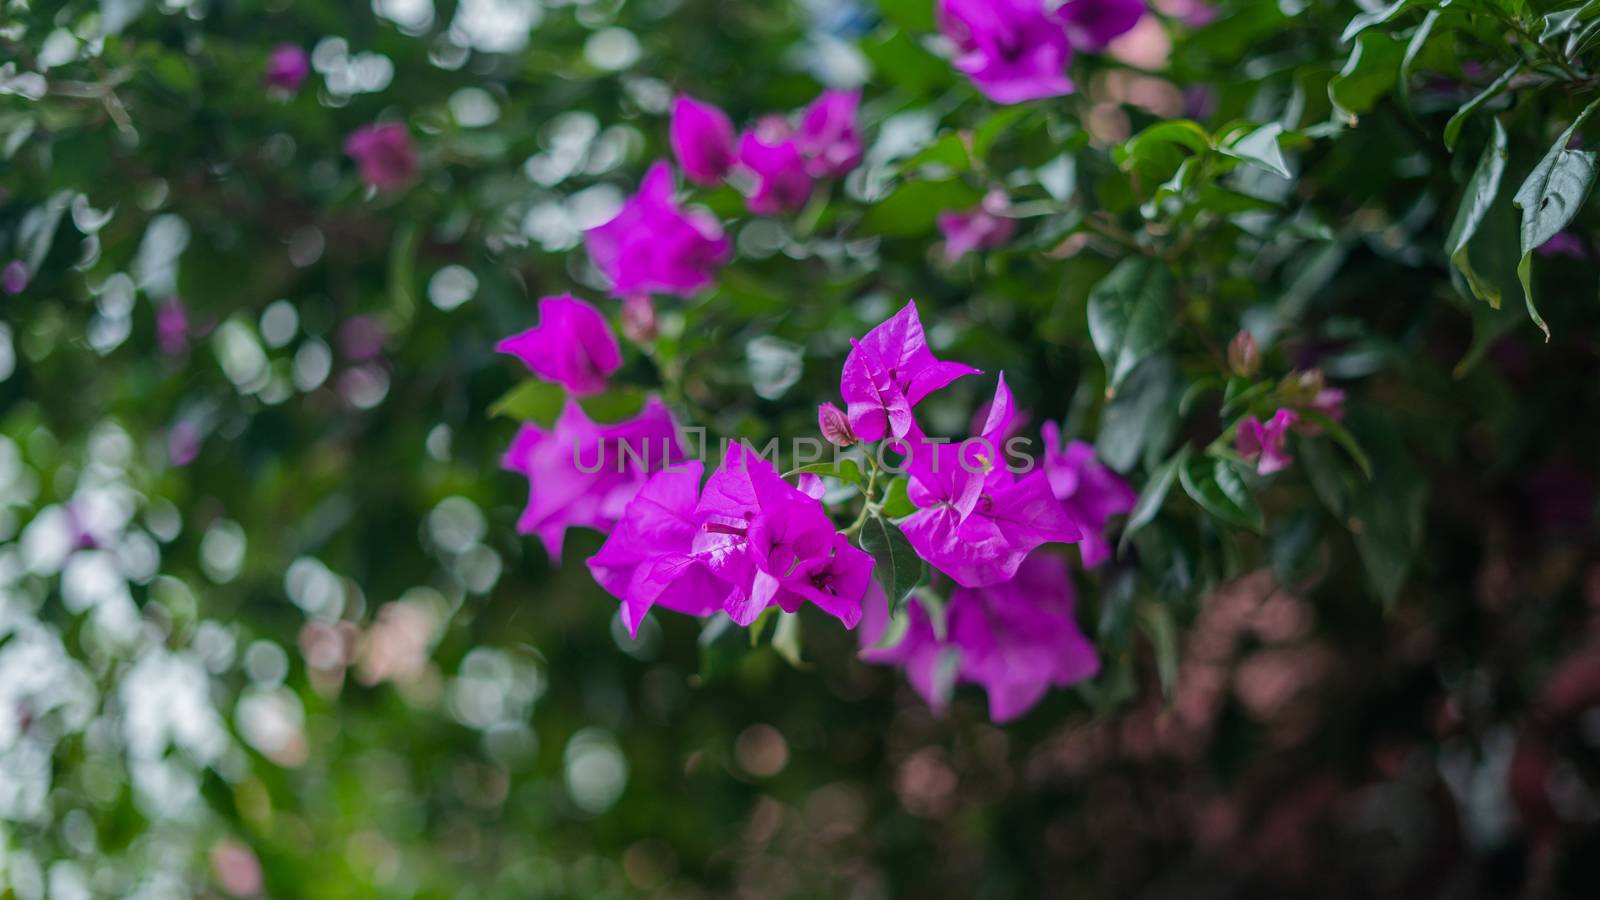 Picture of several purple flowers from a tree with blurry foliage as background